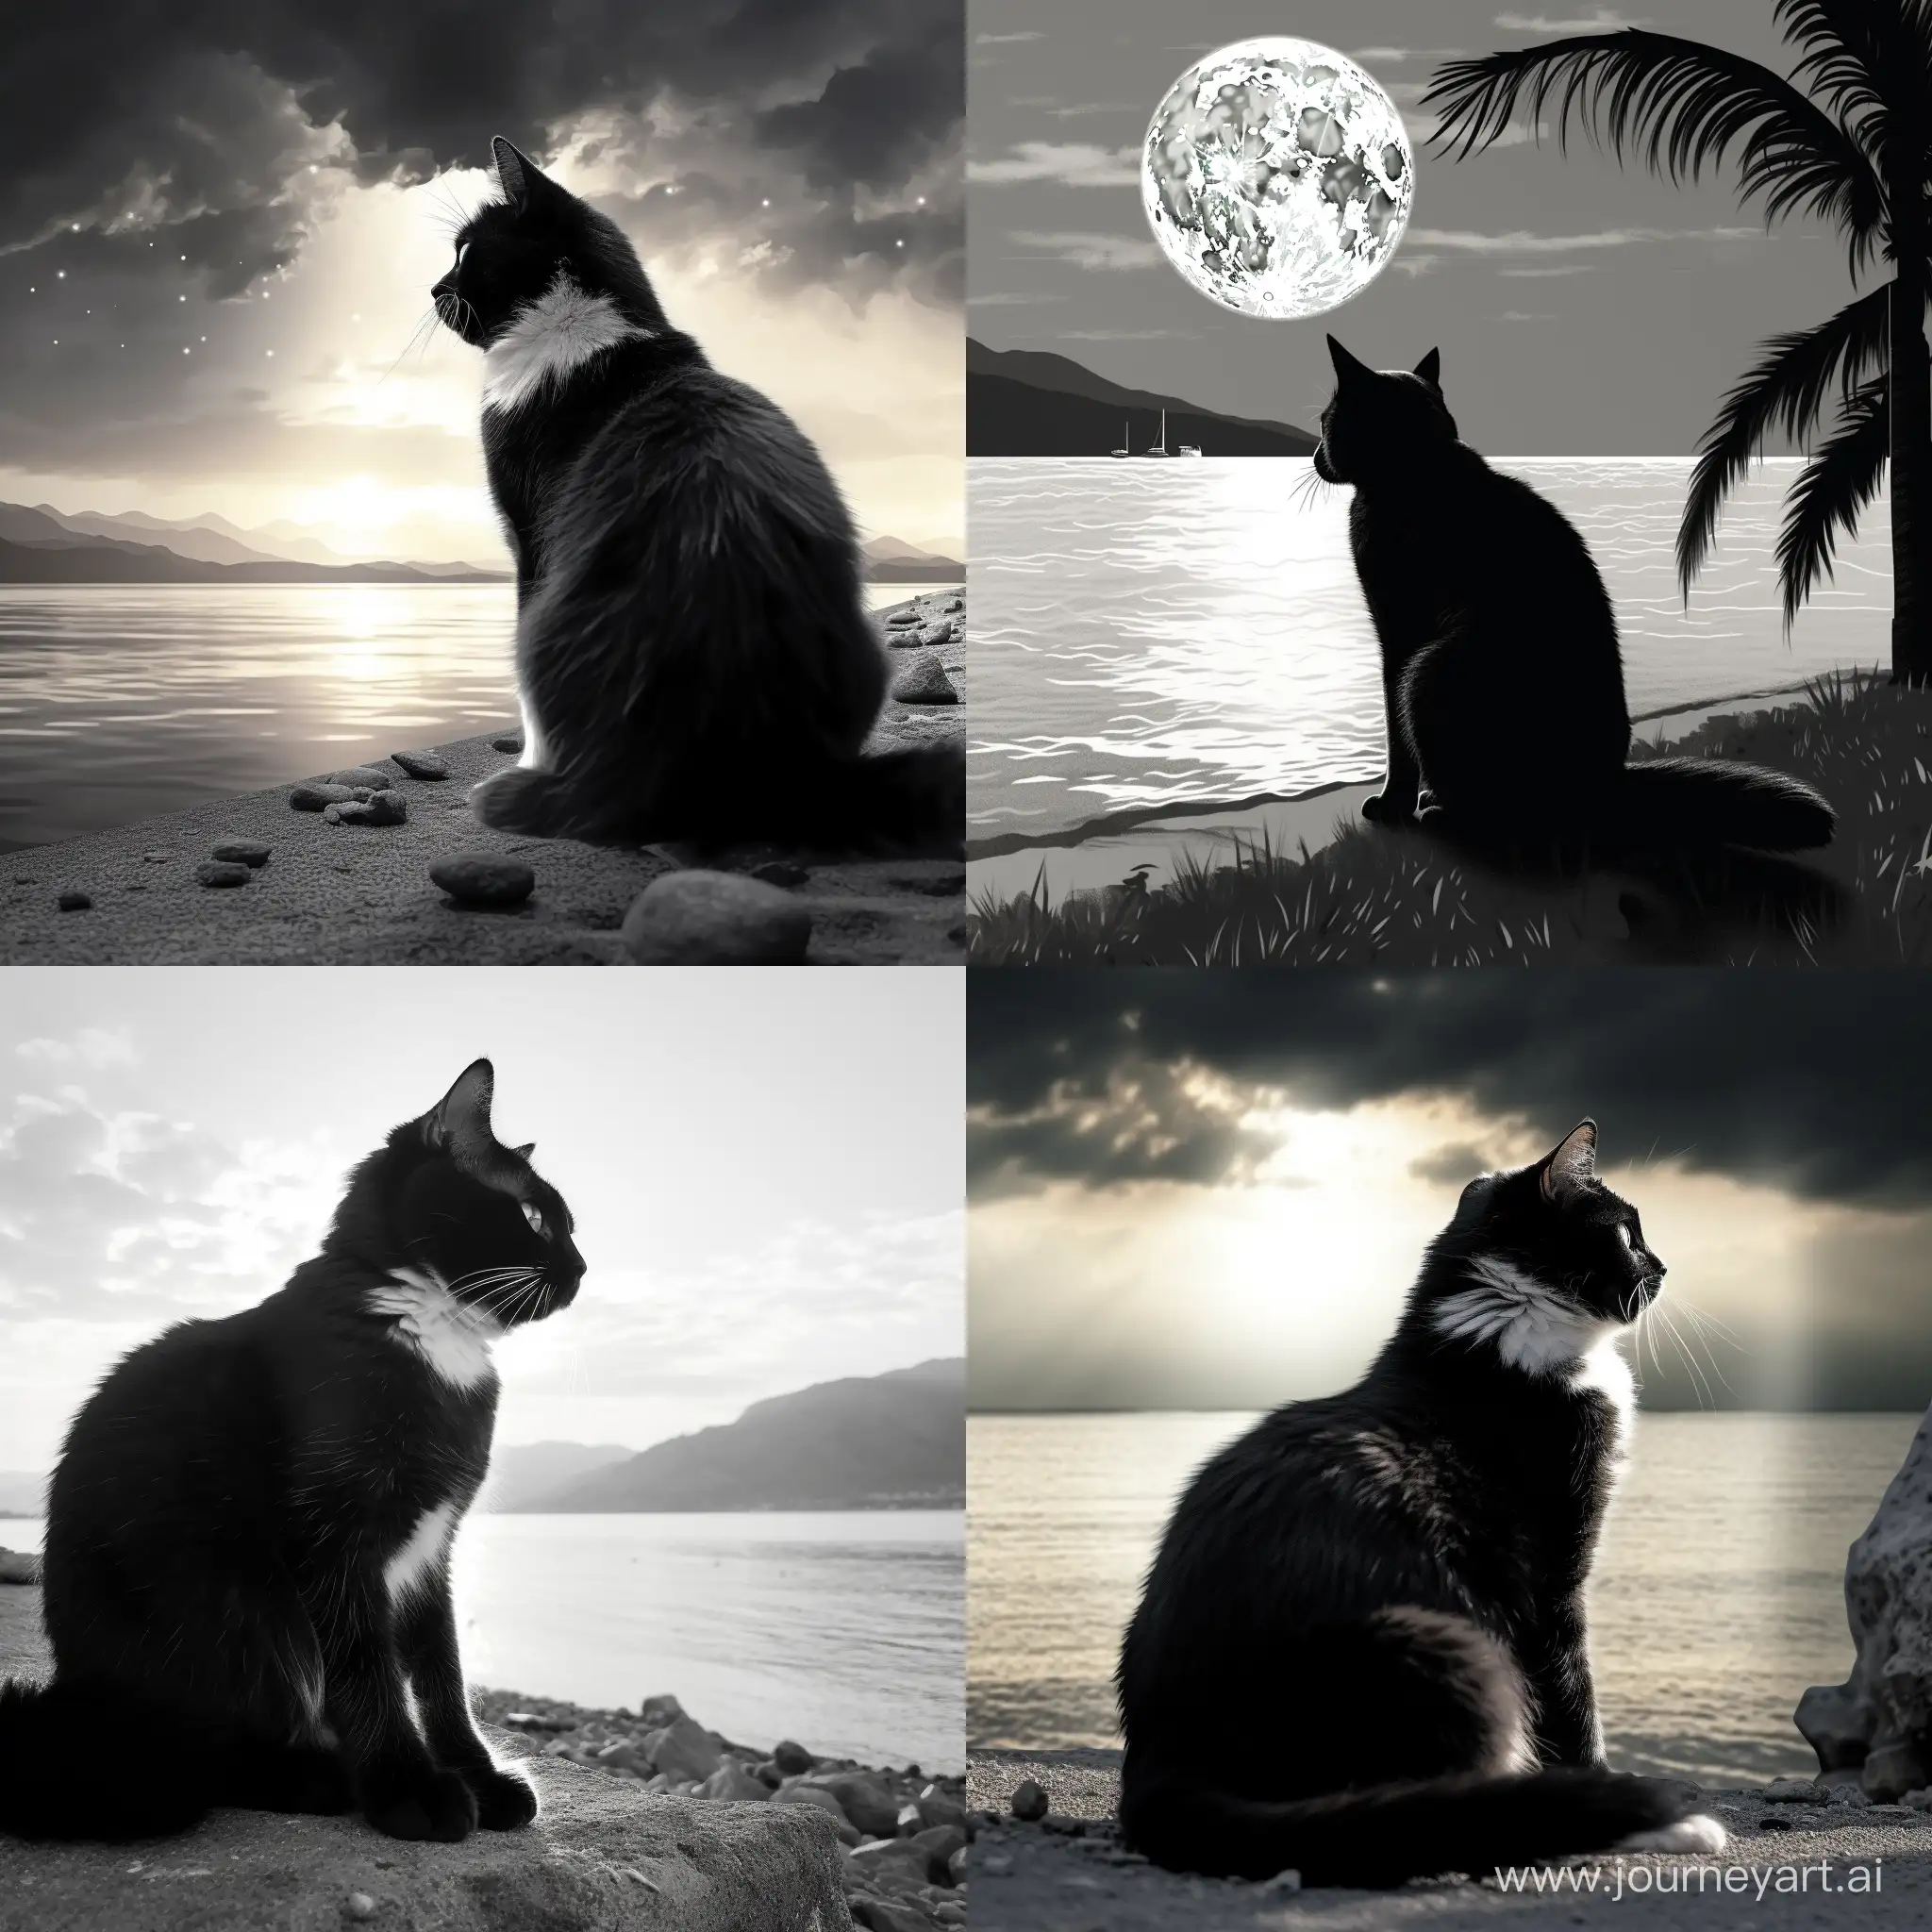 A handsome black and white-patterned cat, crouching by the seaside, gazing at the scenery, silhouette, gentle sea breeze, sunny, hyper-realistic texture, cinematic lighting effects, high-definition image quality.